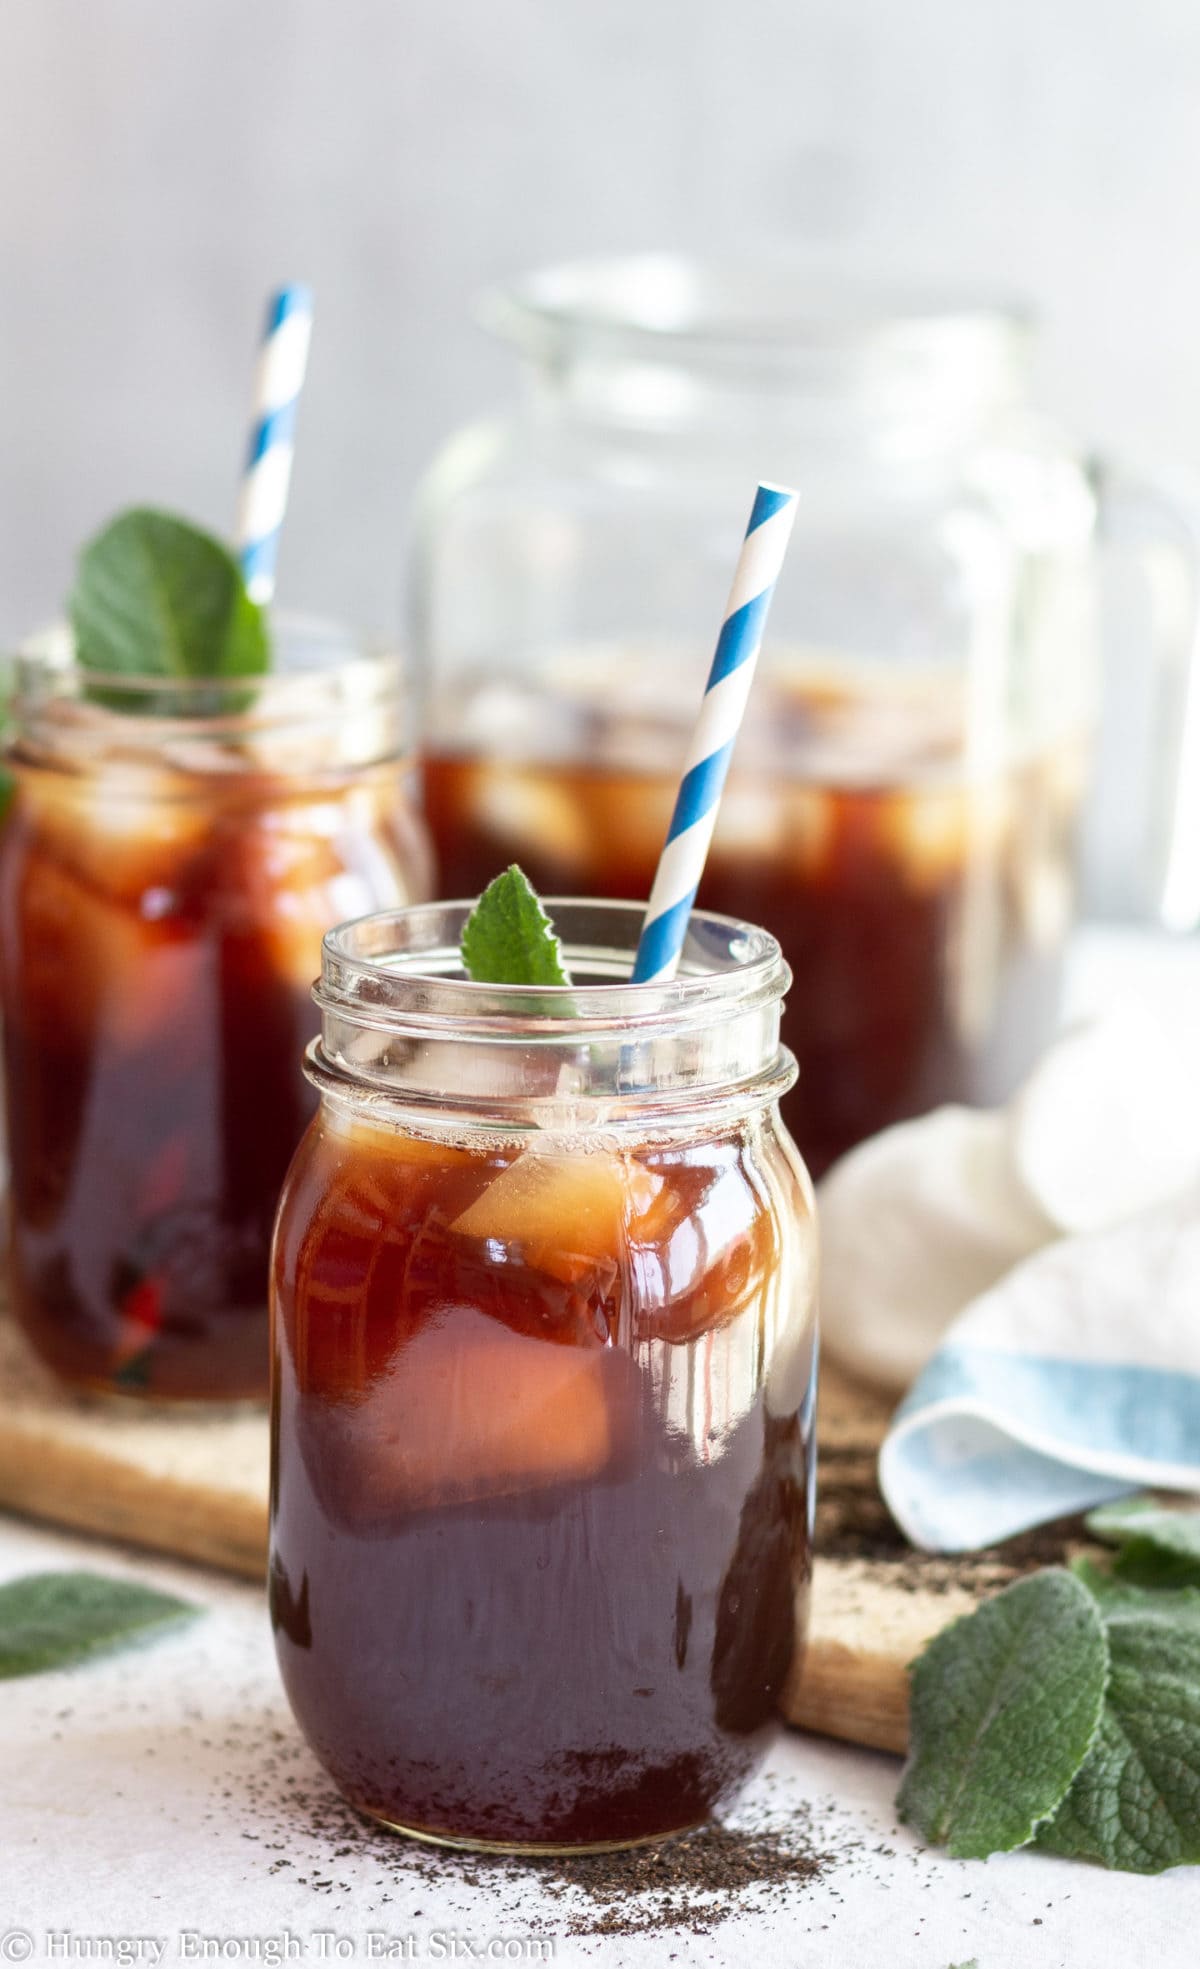 Medium sized mason jar holding iced tea and ice cubes with more containers of tea in background.